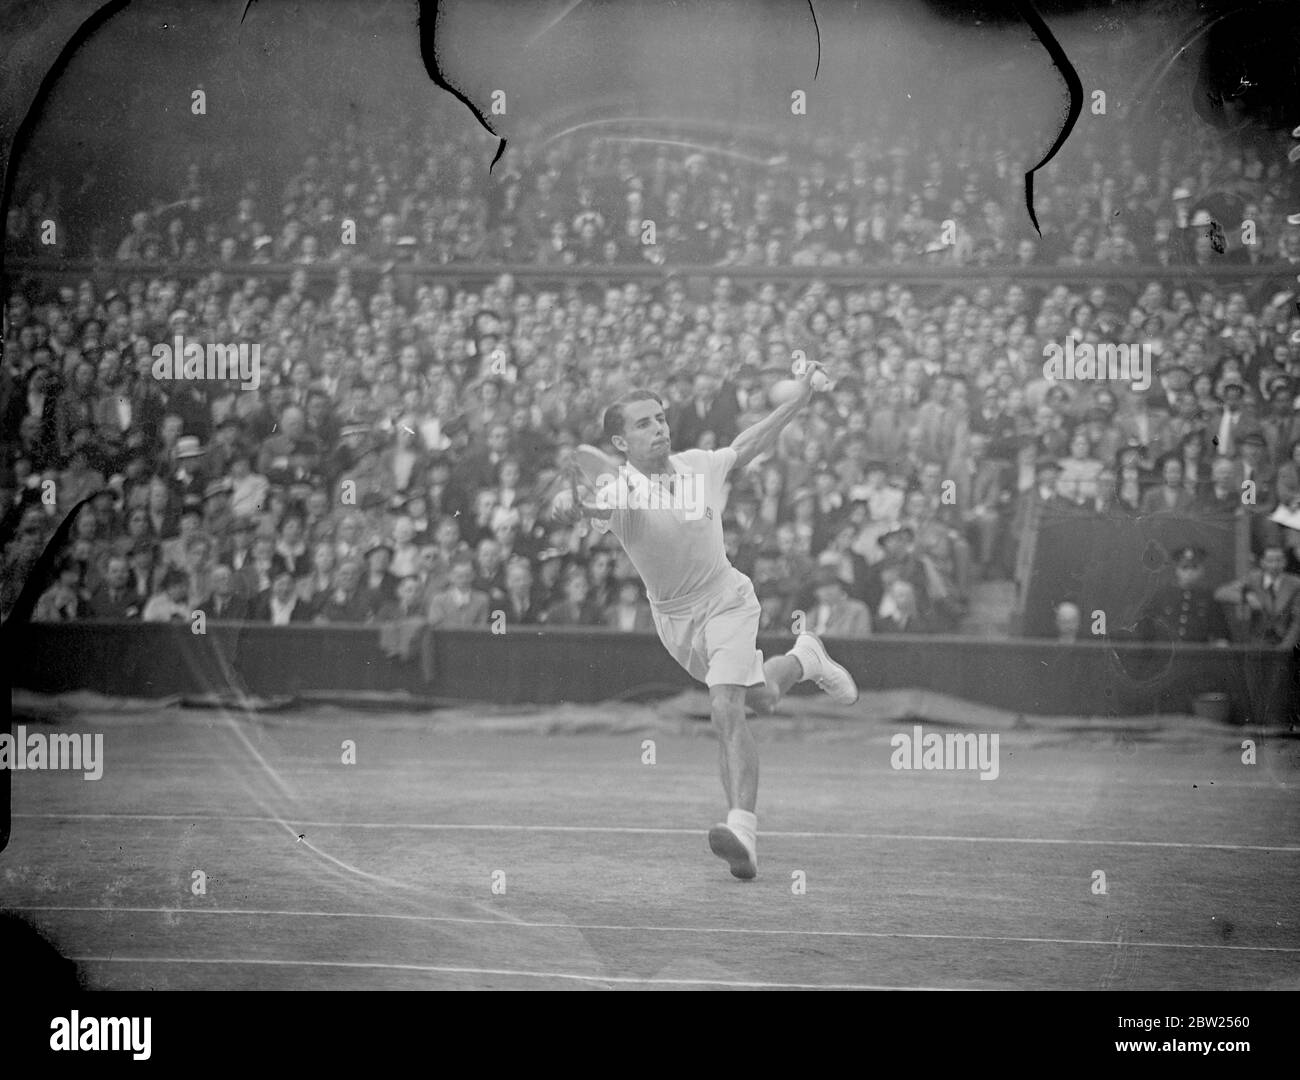 Budge beats Austin to retain Wimbledon title. Donald Budge, the American beat H W (Bunny) Austin in three sets 6-1, 6-0, 6-3 to retain the men's singles title at Wimbledon, London. Photo shows, Bunny Austin in play. 1 July 1938 Stock Photo